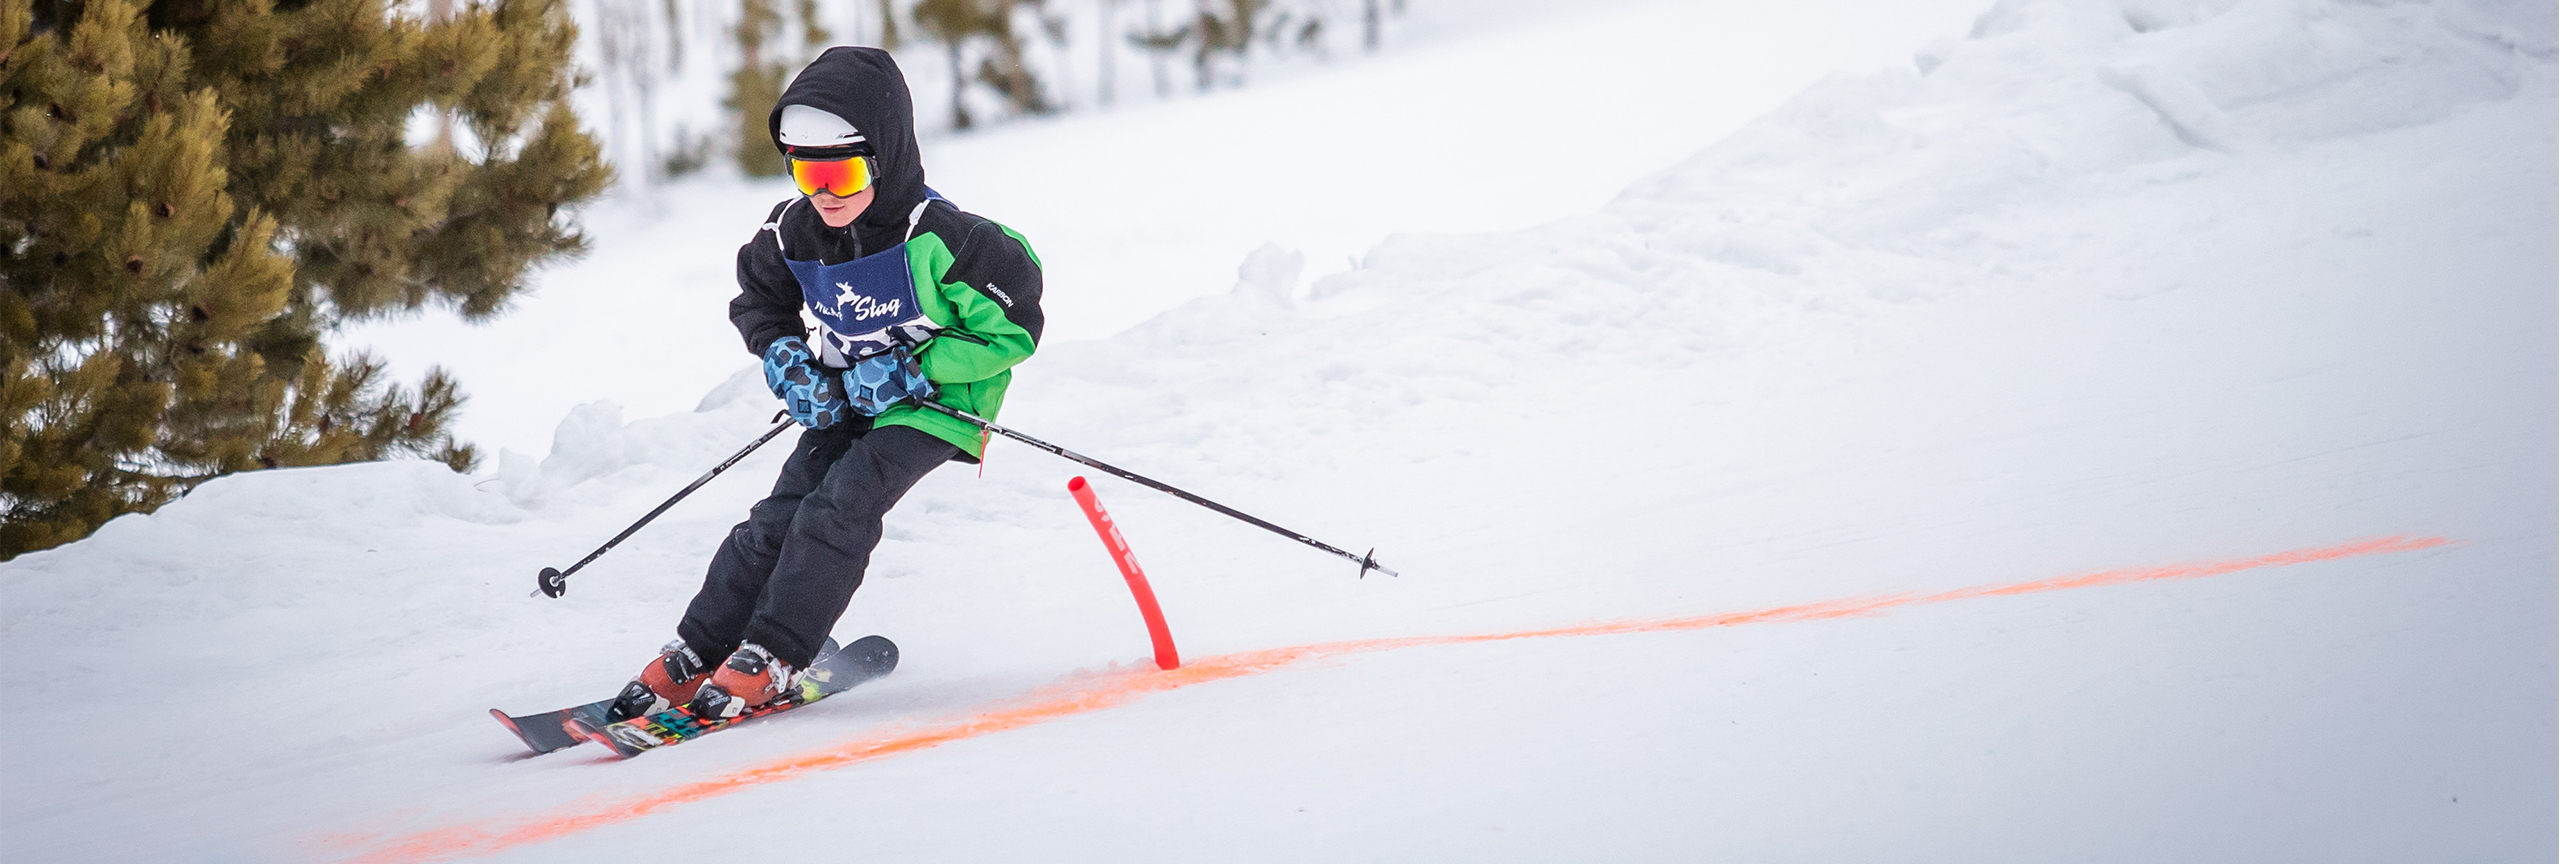 Young boy skiing at Bubble Gum Ski Race.